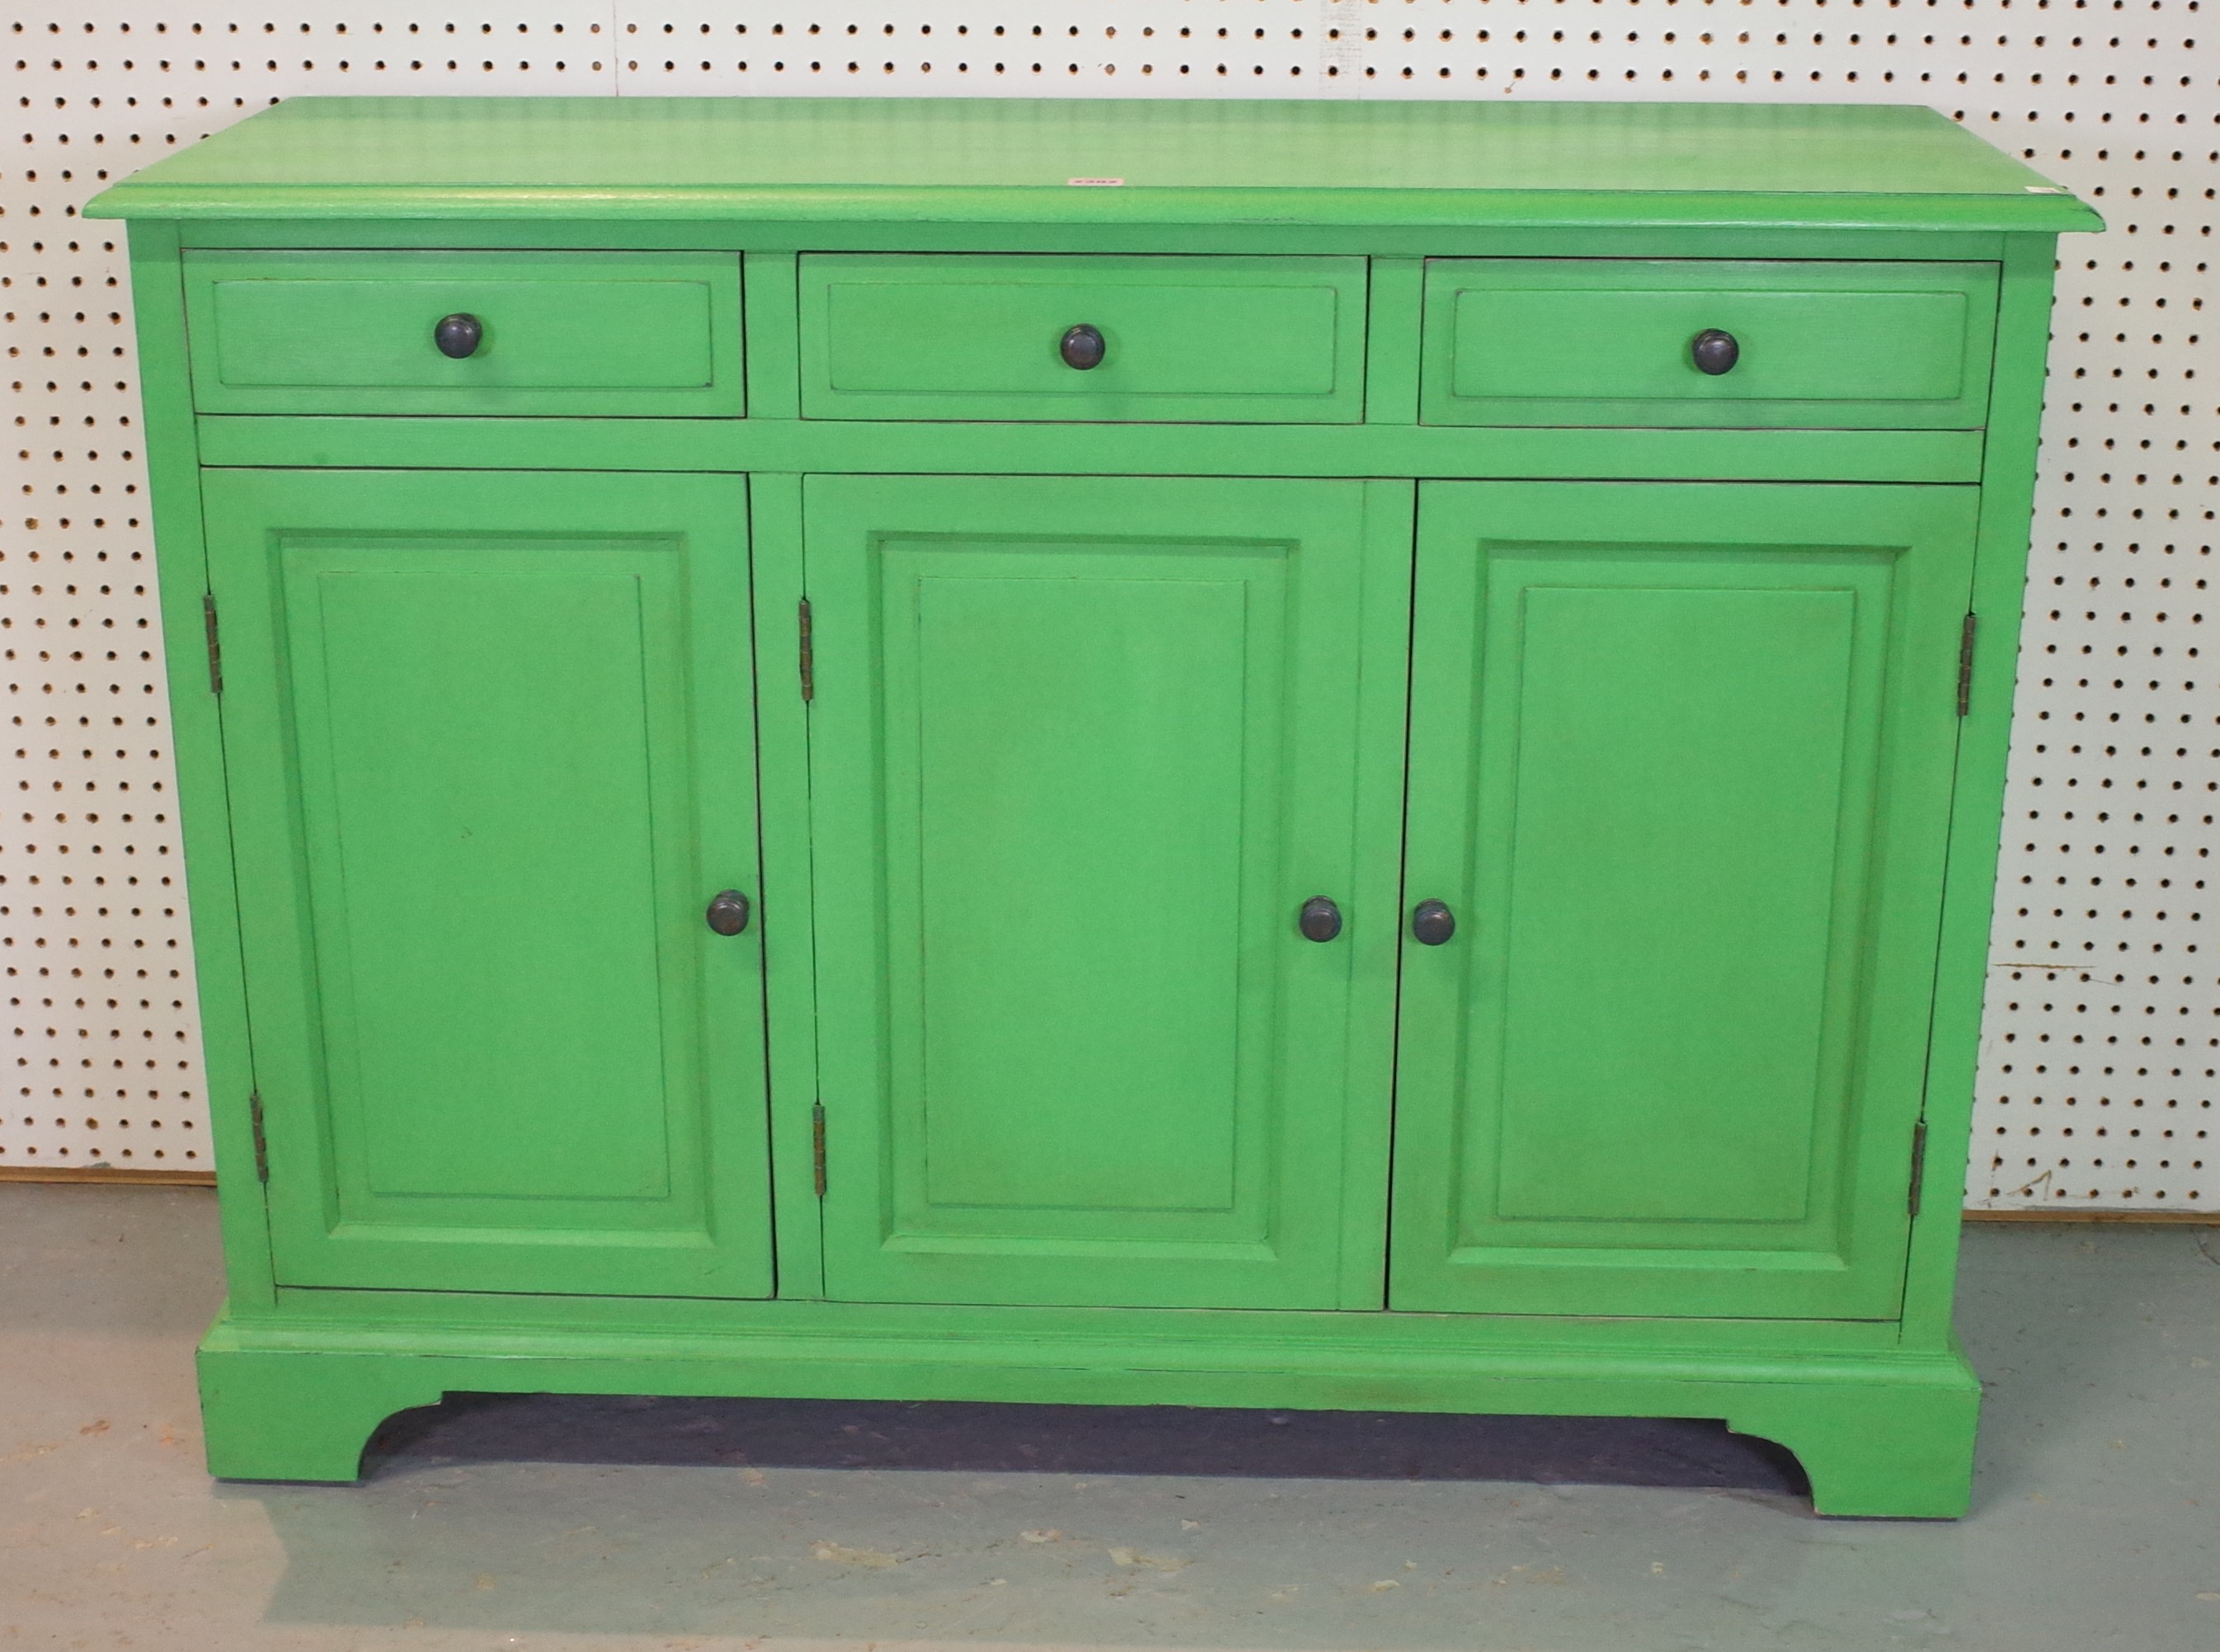 A MODERN GREEN PAINTED SIDE CABINET WITH THREE DRAWERS AND THREE CUPBOARDS